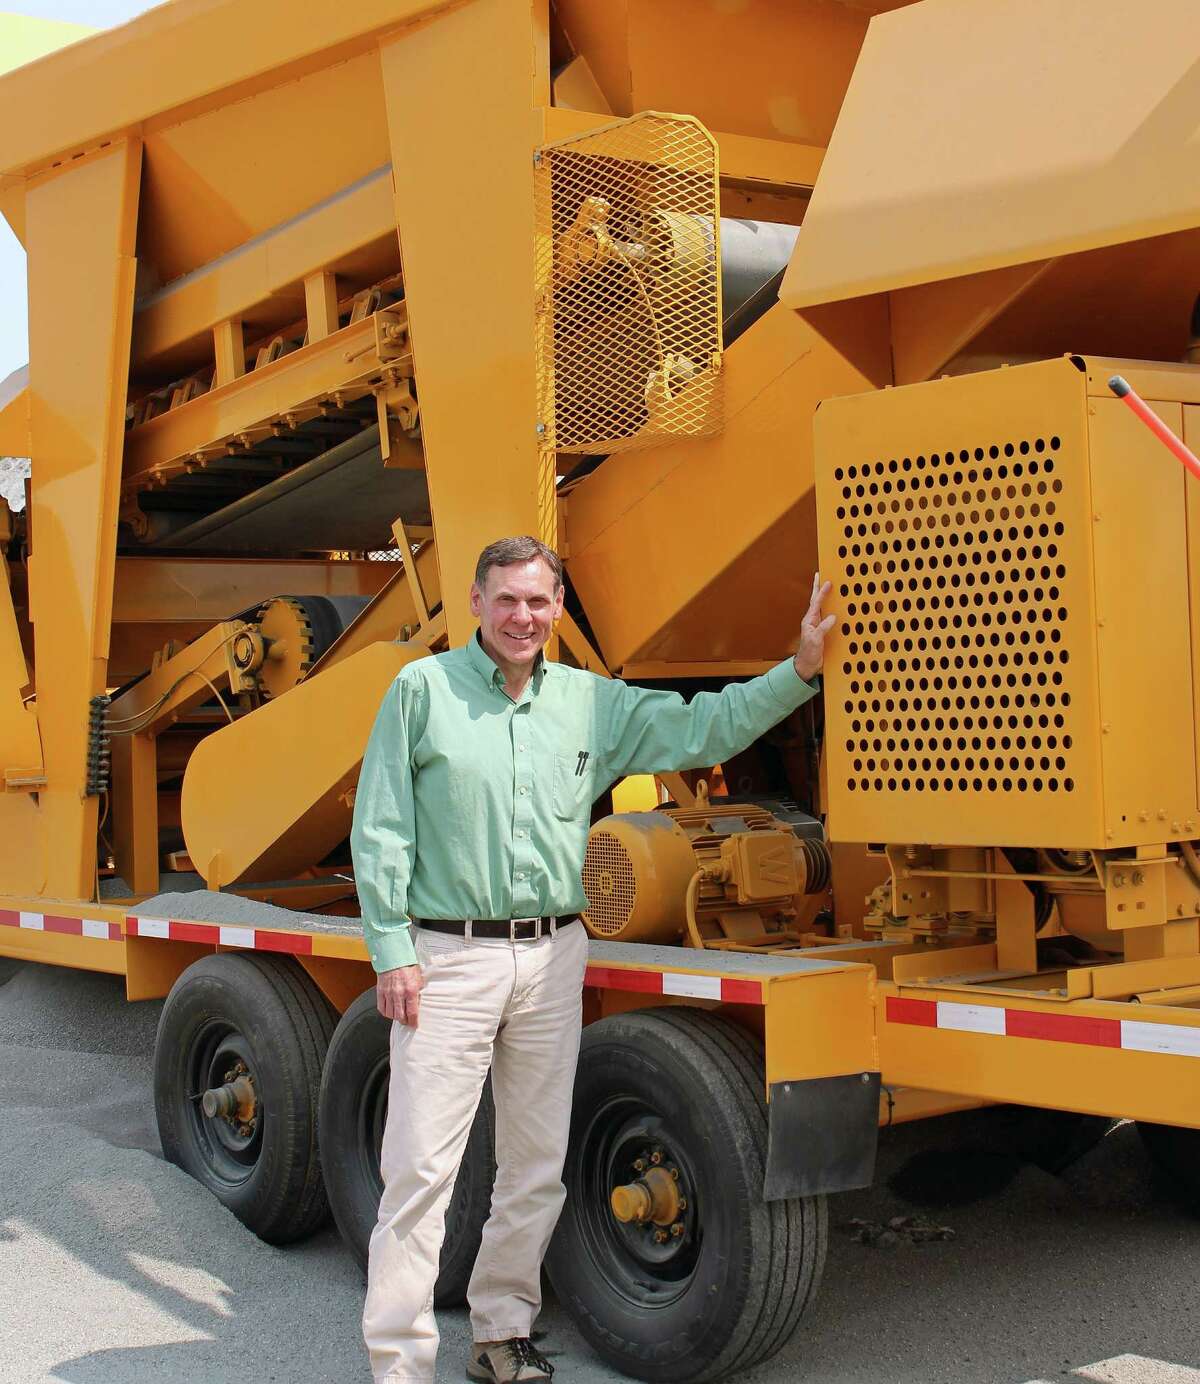 Public Works Superintendent Scott Bartlett celebrates his 35th year with the town this August. Here, he stands in front of some of the equipment used to pave and maintain the town's roads.